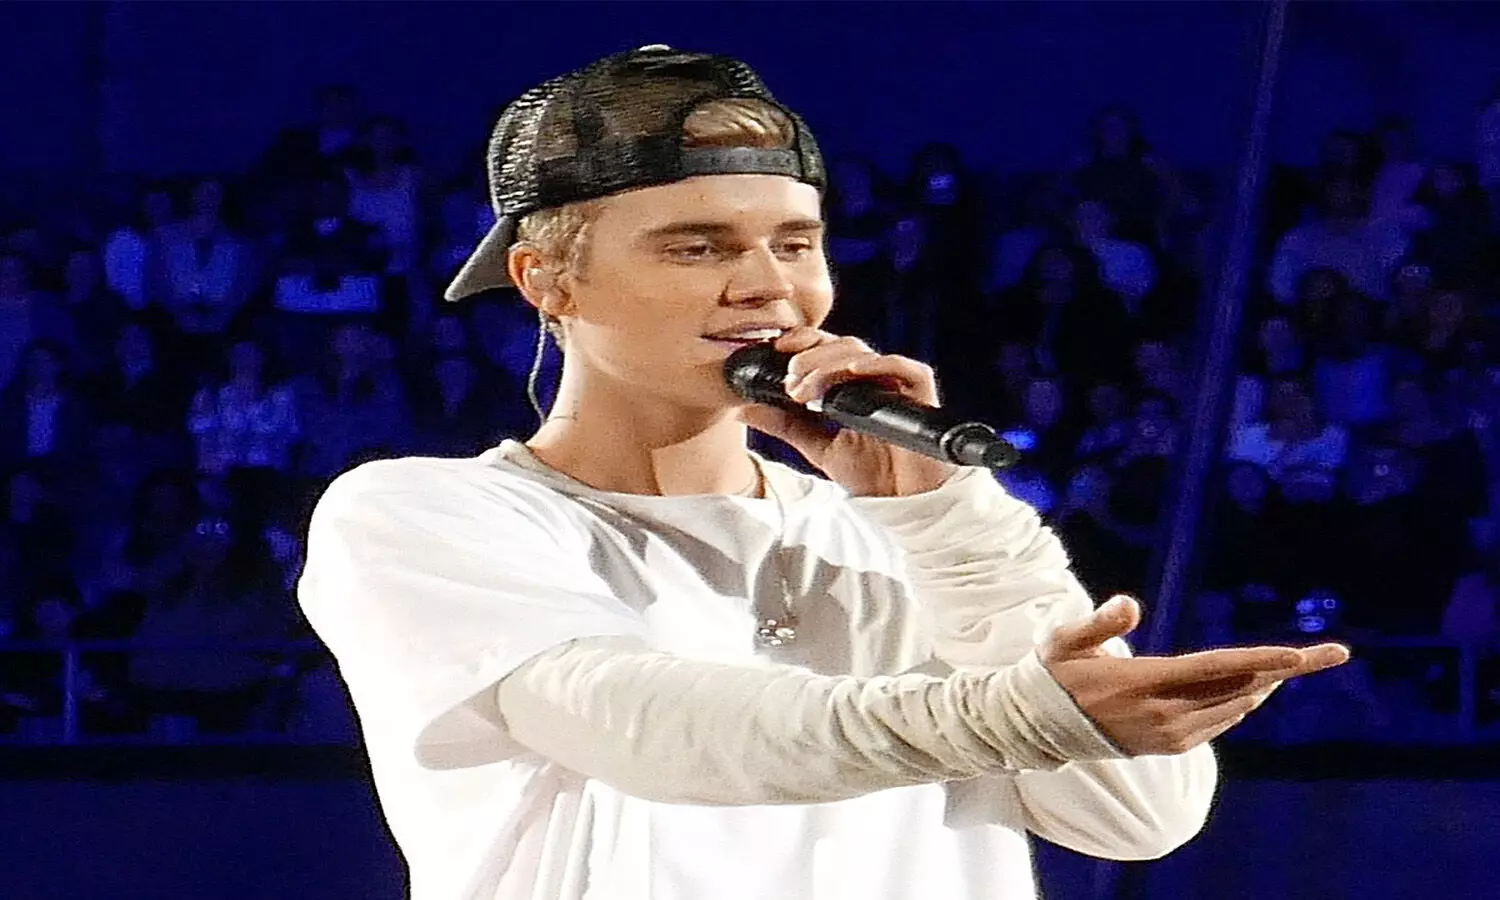 Justin Bieber diagnosed with Ramsay Hunt syndrome, 5 things to know about the rare condition